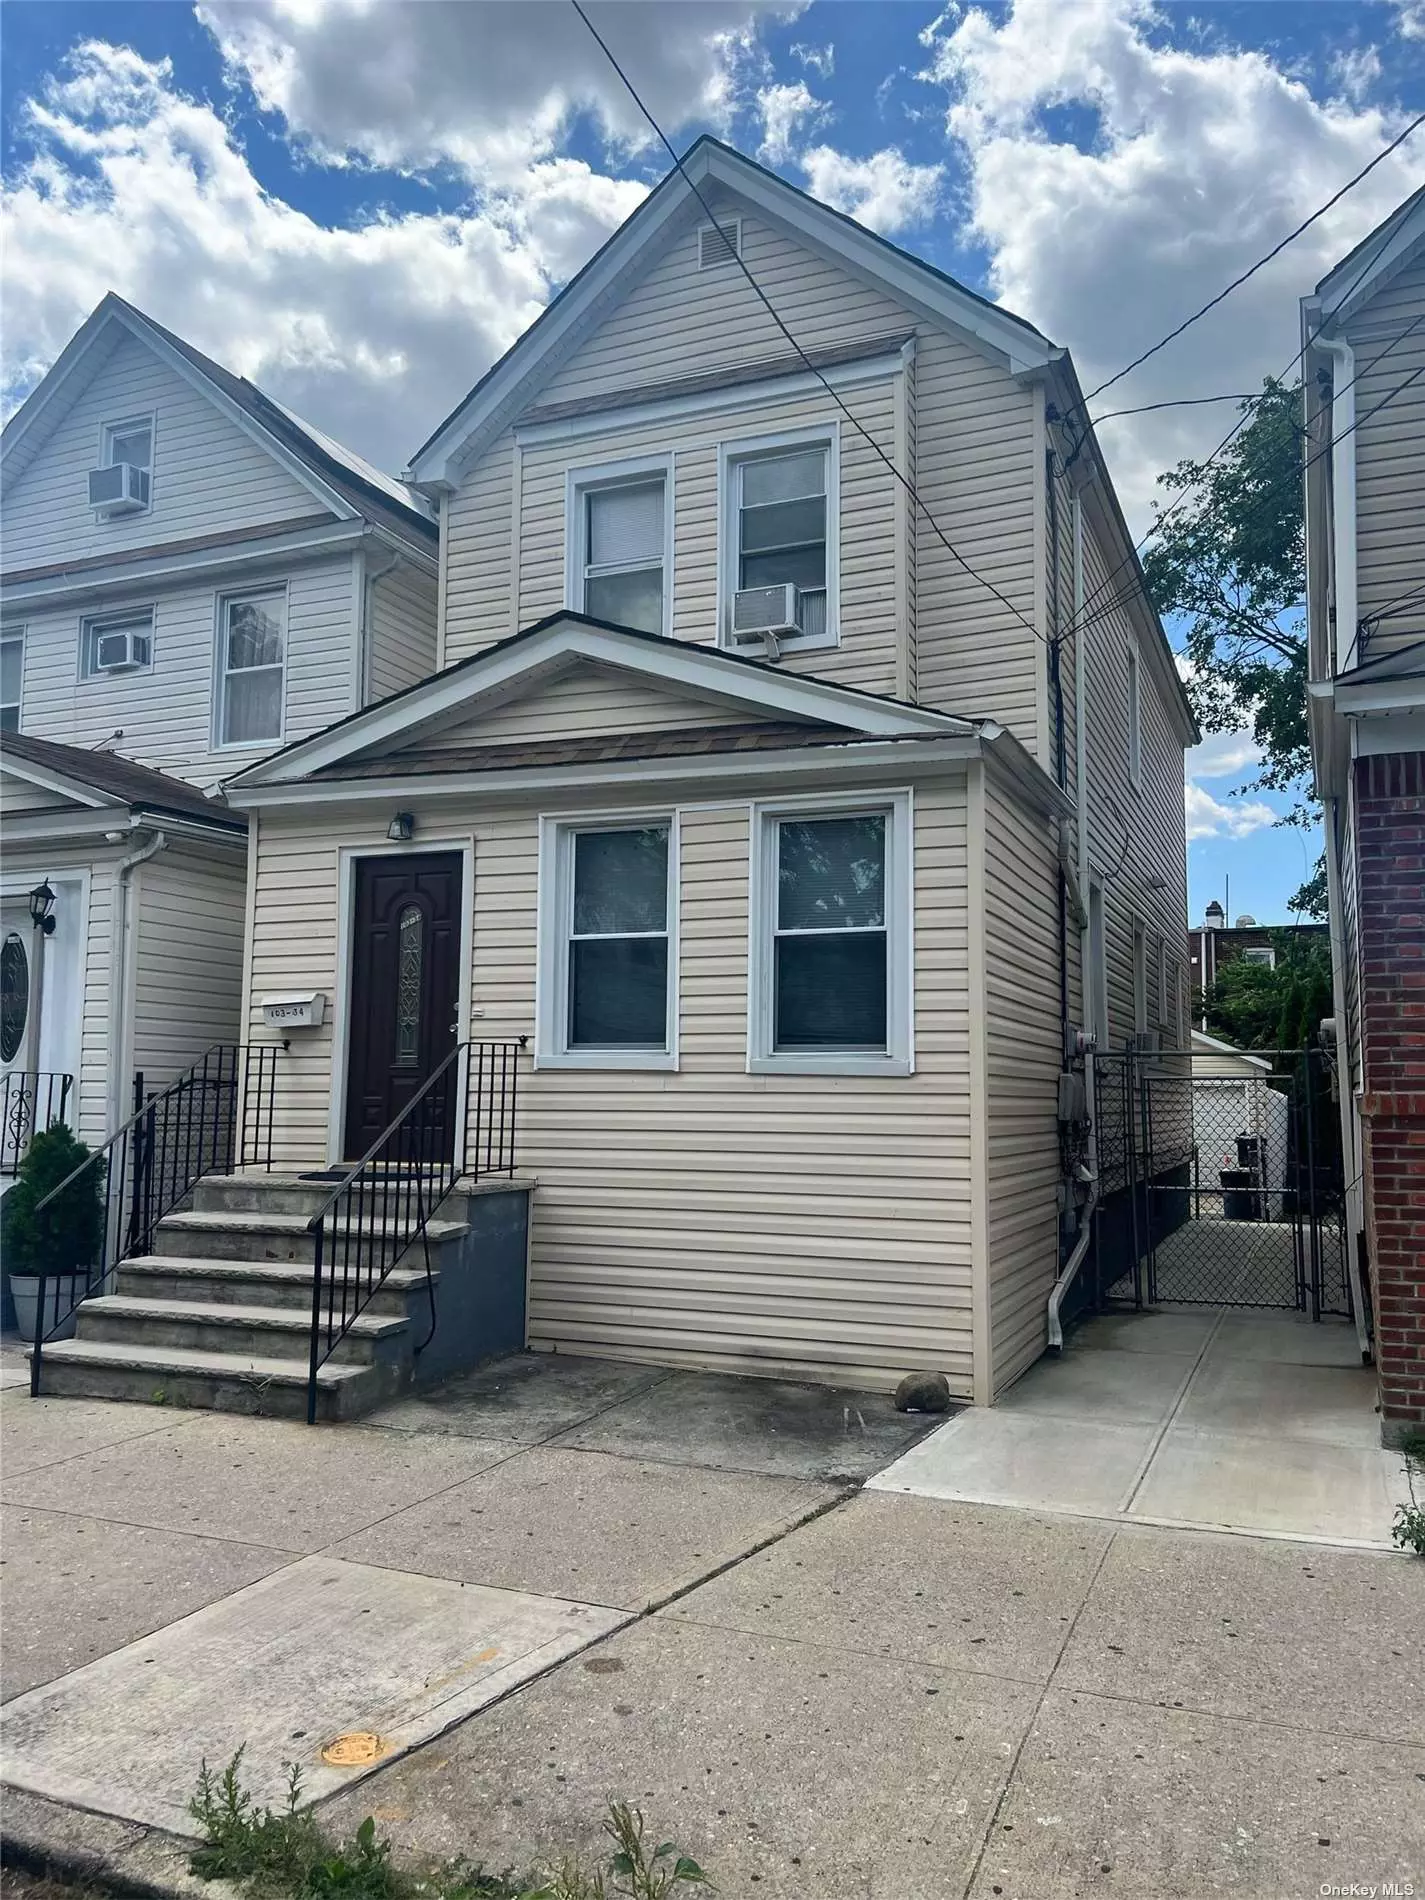 2 Family in mint condition just footsteps away from the A train. This property features 4 bedrooms, 3 full baths, 2 kitchens and a full finished basement with outside entrance. Close to all amenities.